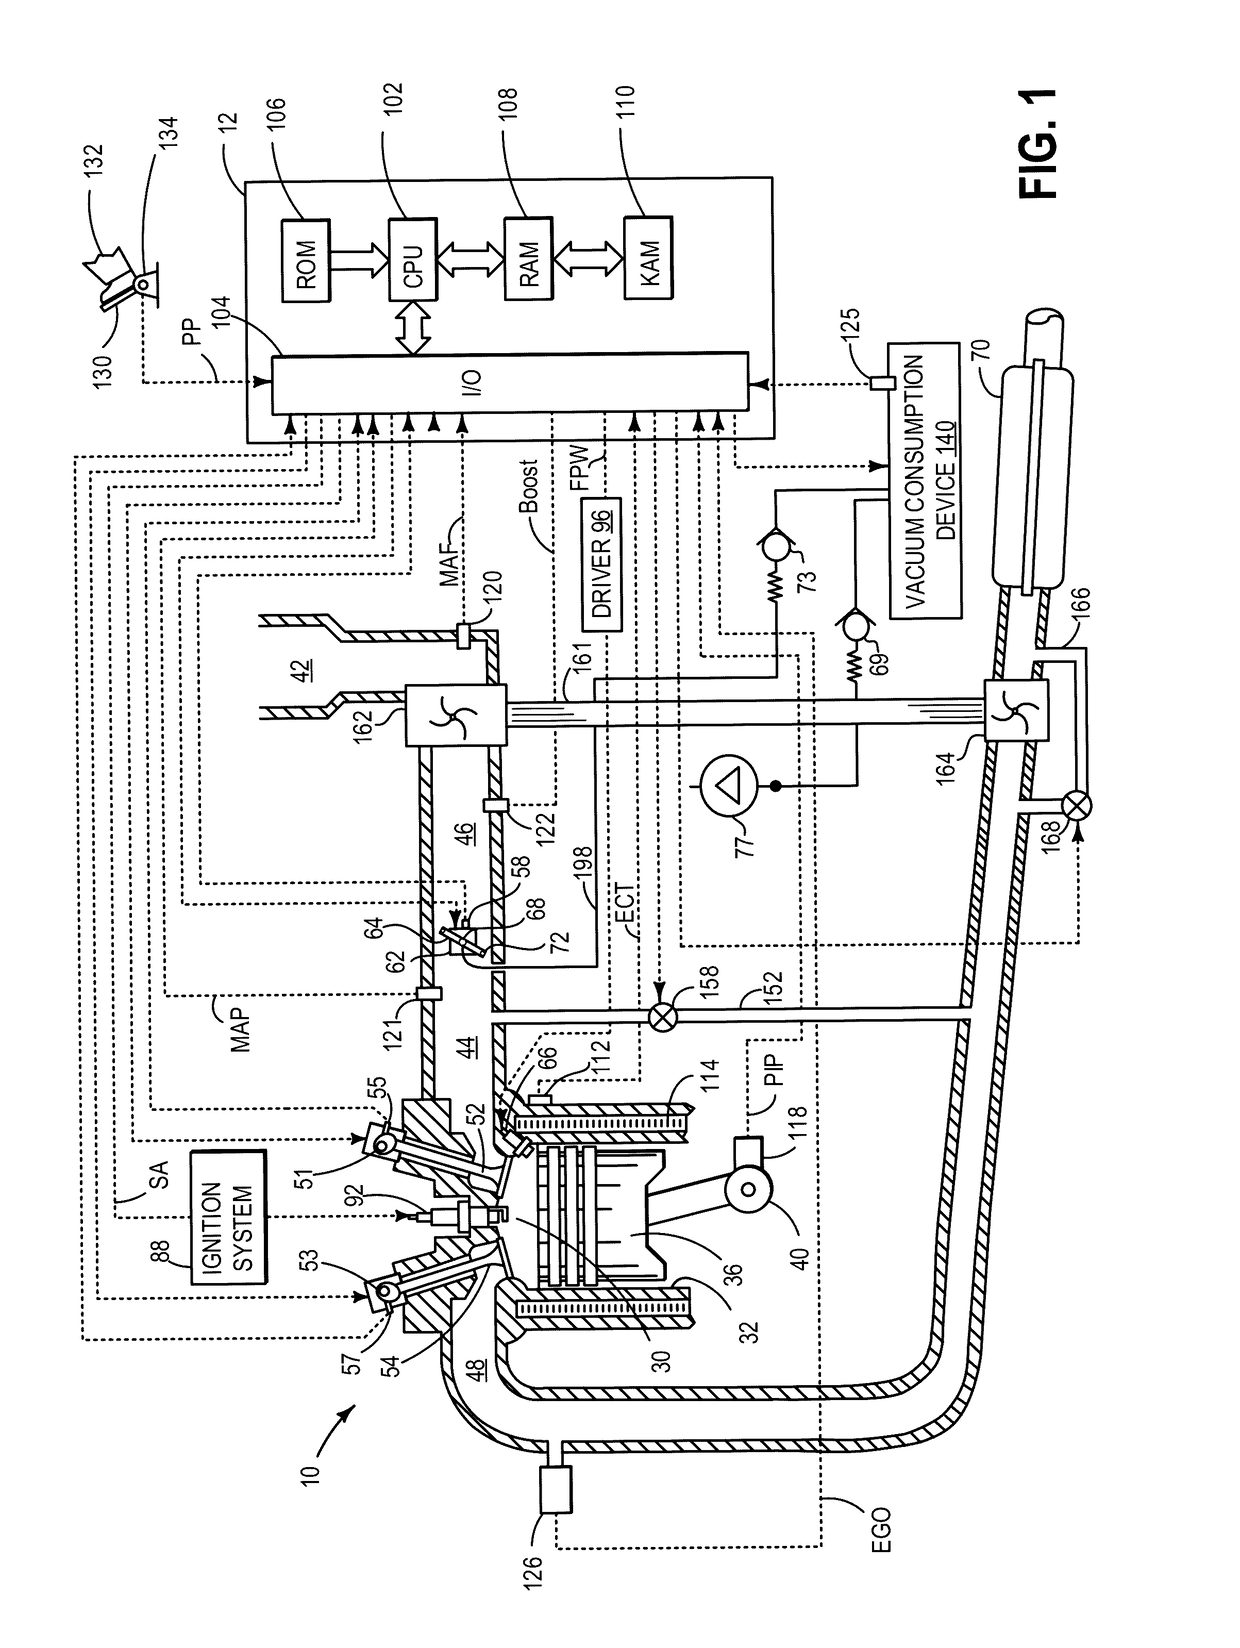 Method and system for vacuum generation using a throttle comprising a hollow passage